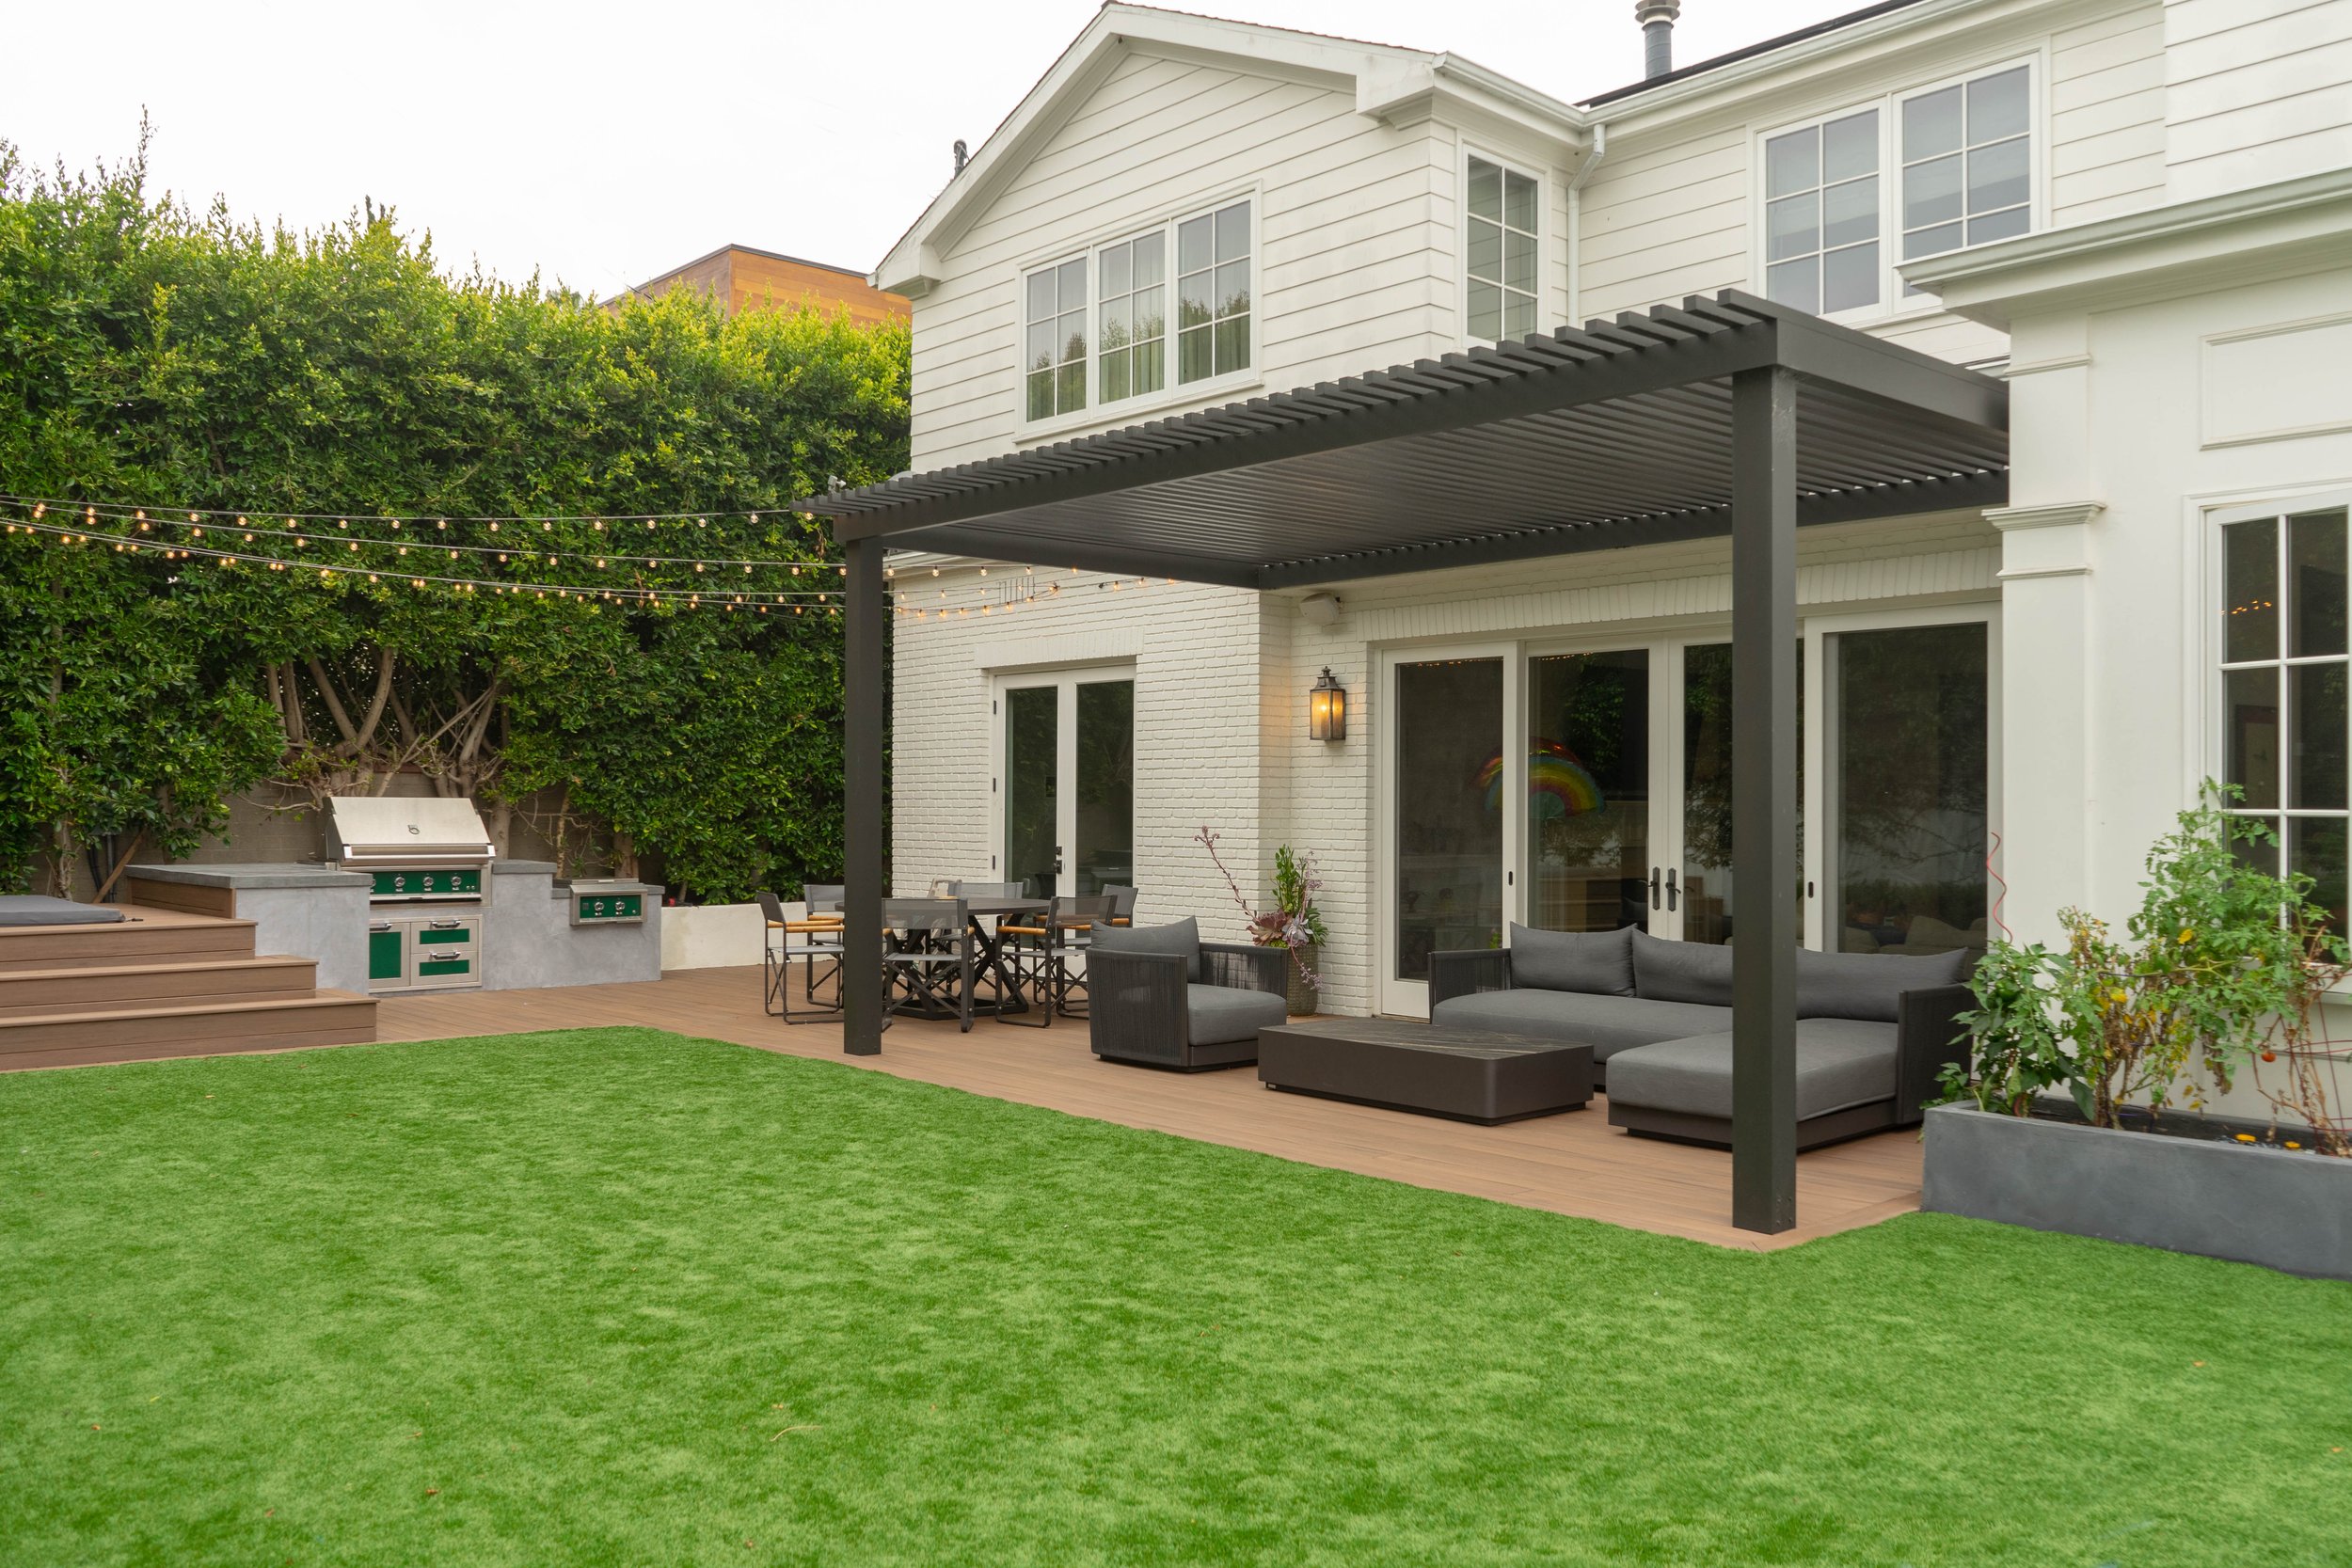 Backyard patio, outdoor kitchen, sitting and dining areas, pergola with whimsical light and a lawn